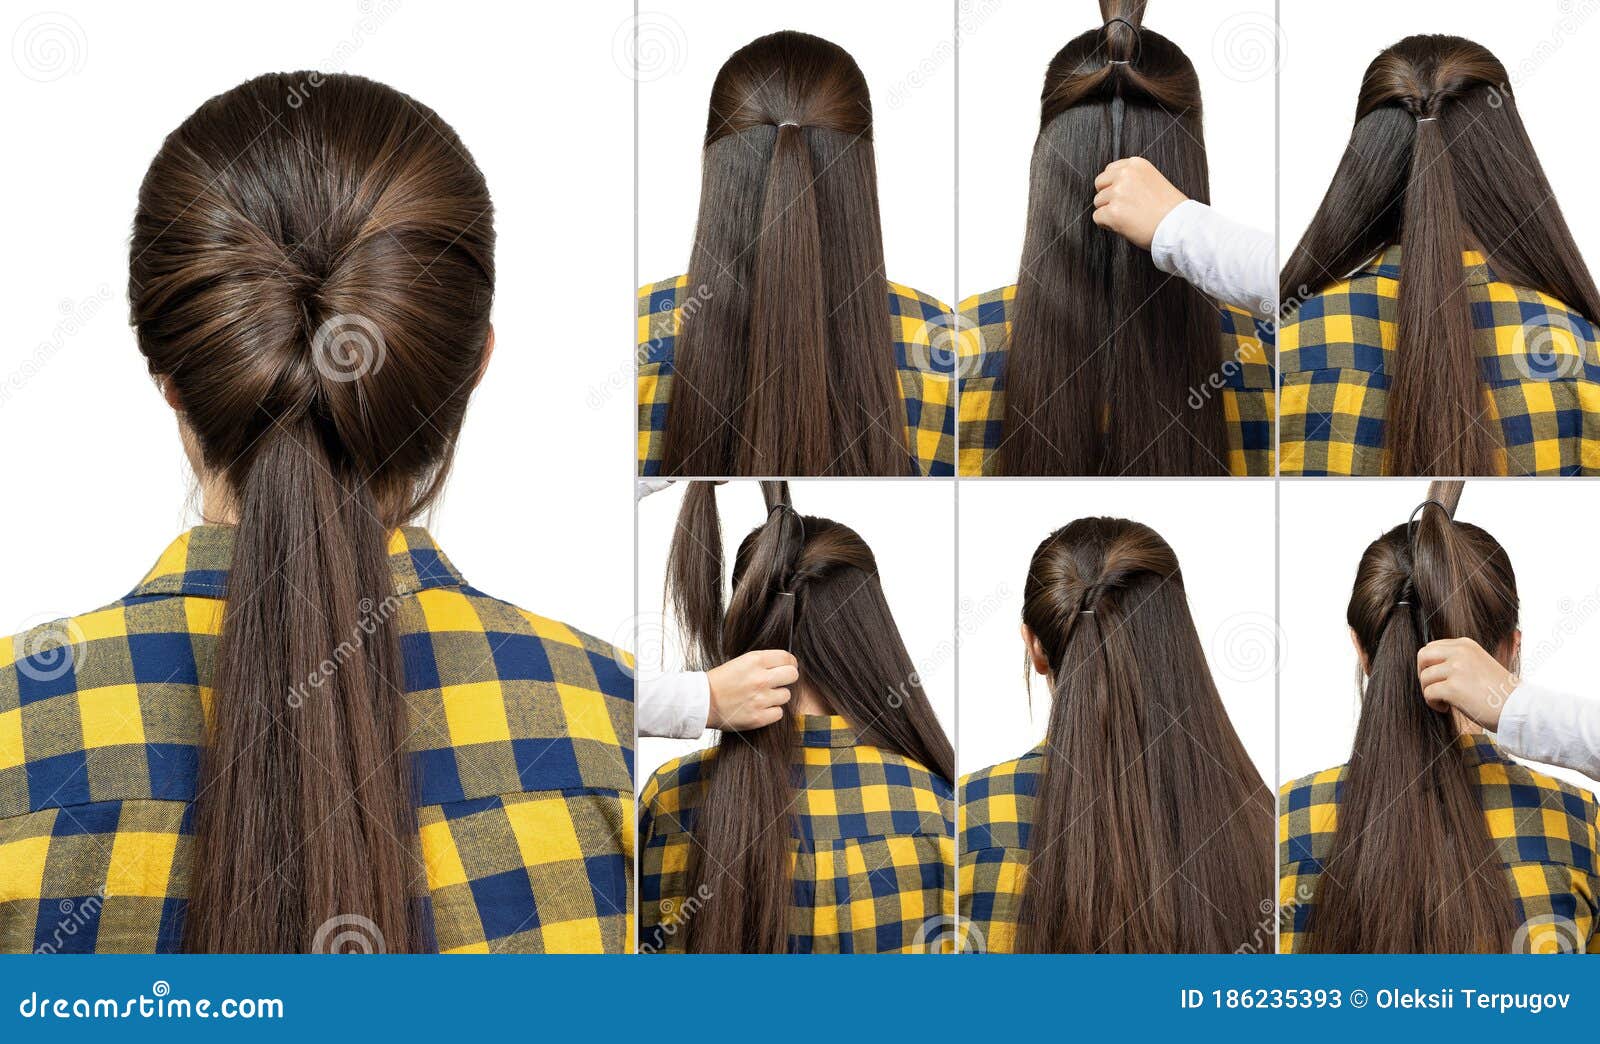 49 Ponytail Hairstyles for the Chic Woman – Svelte Magazine